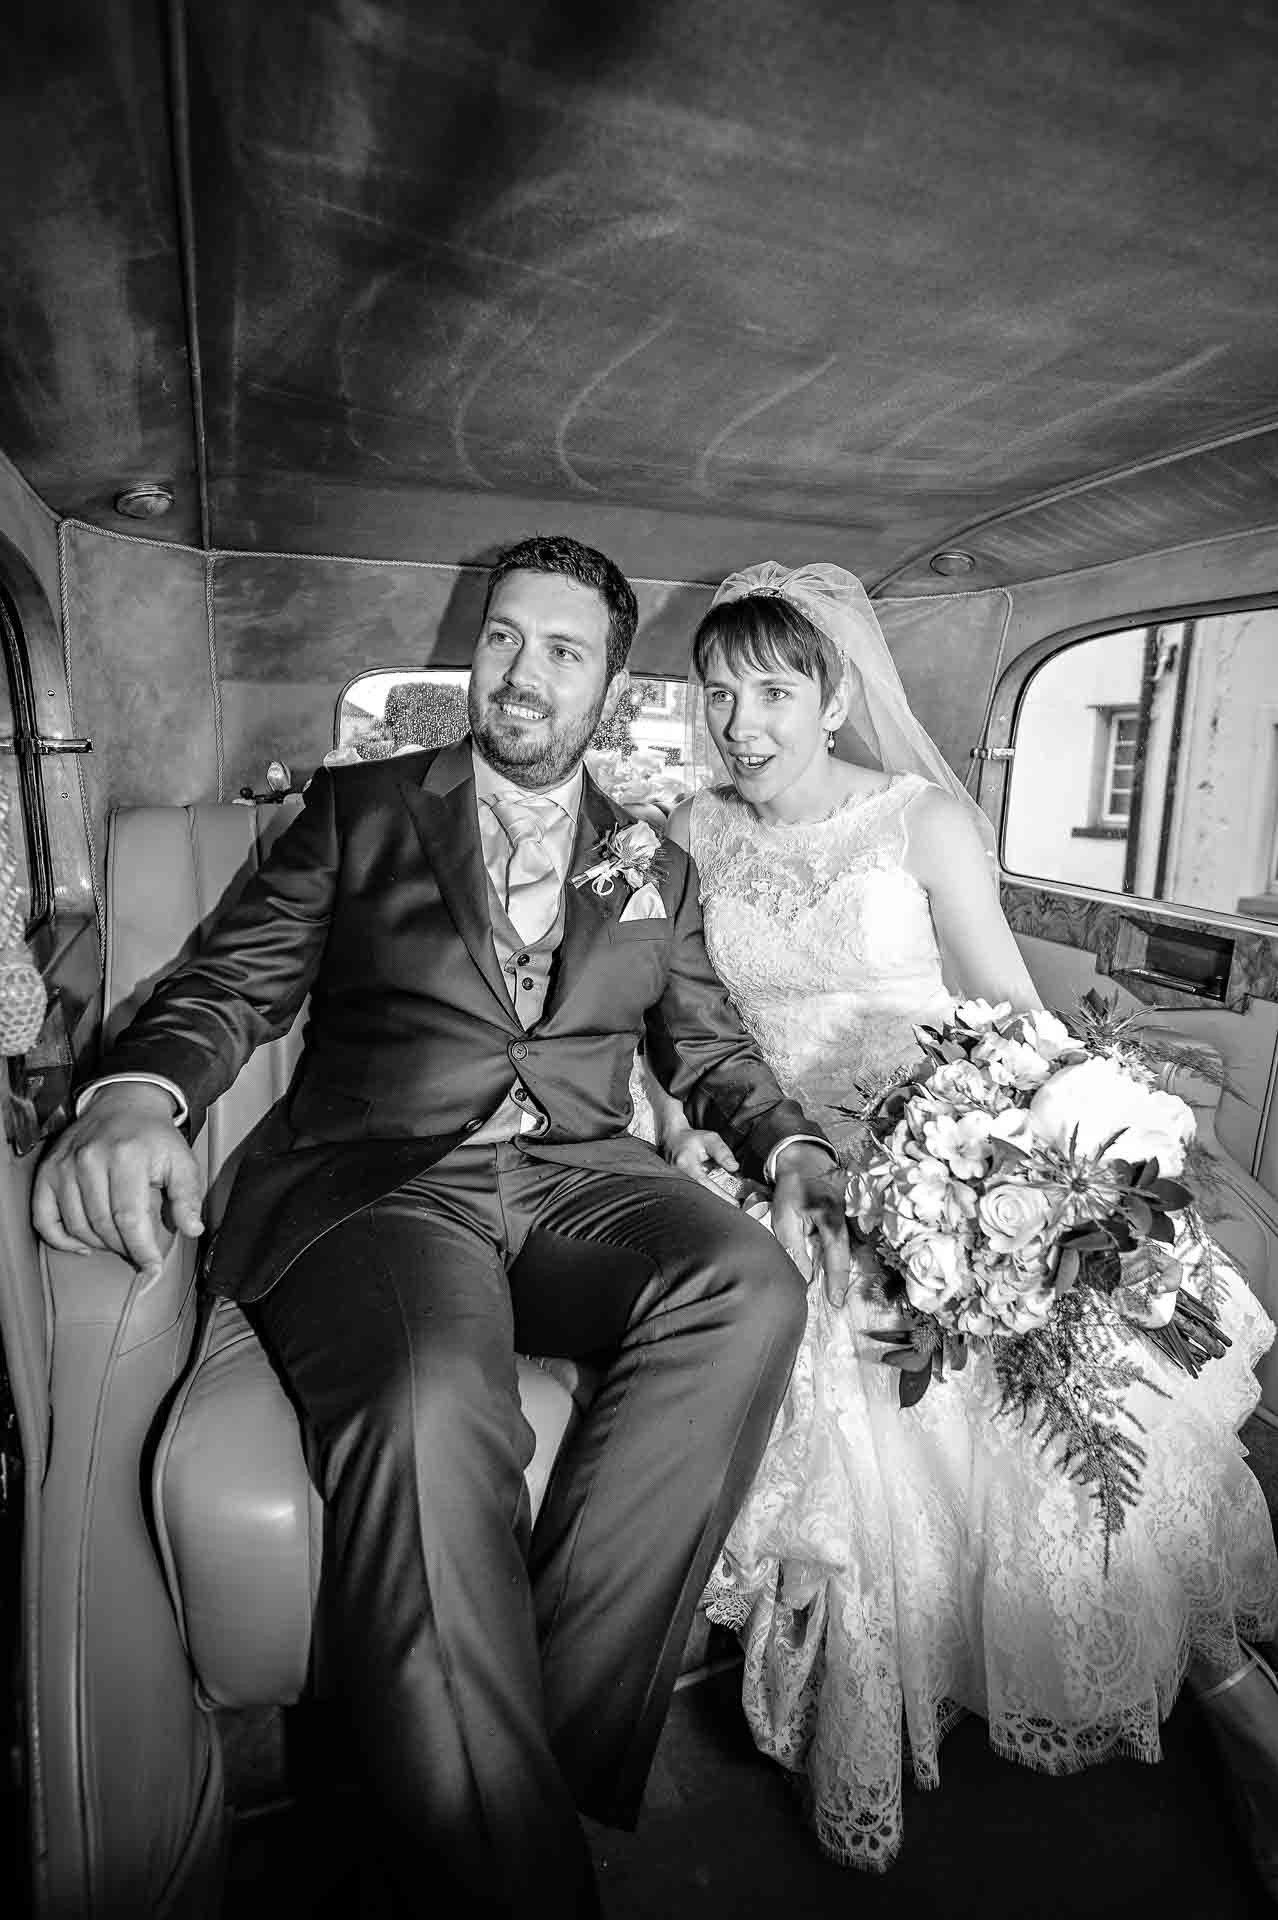 Bride and groom in back of vintage car after their wedding ceremony